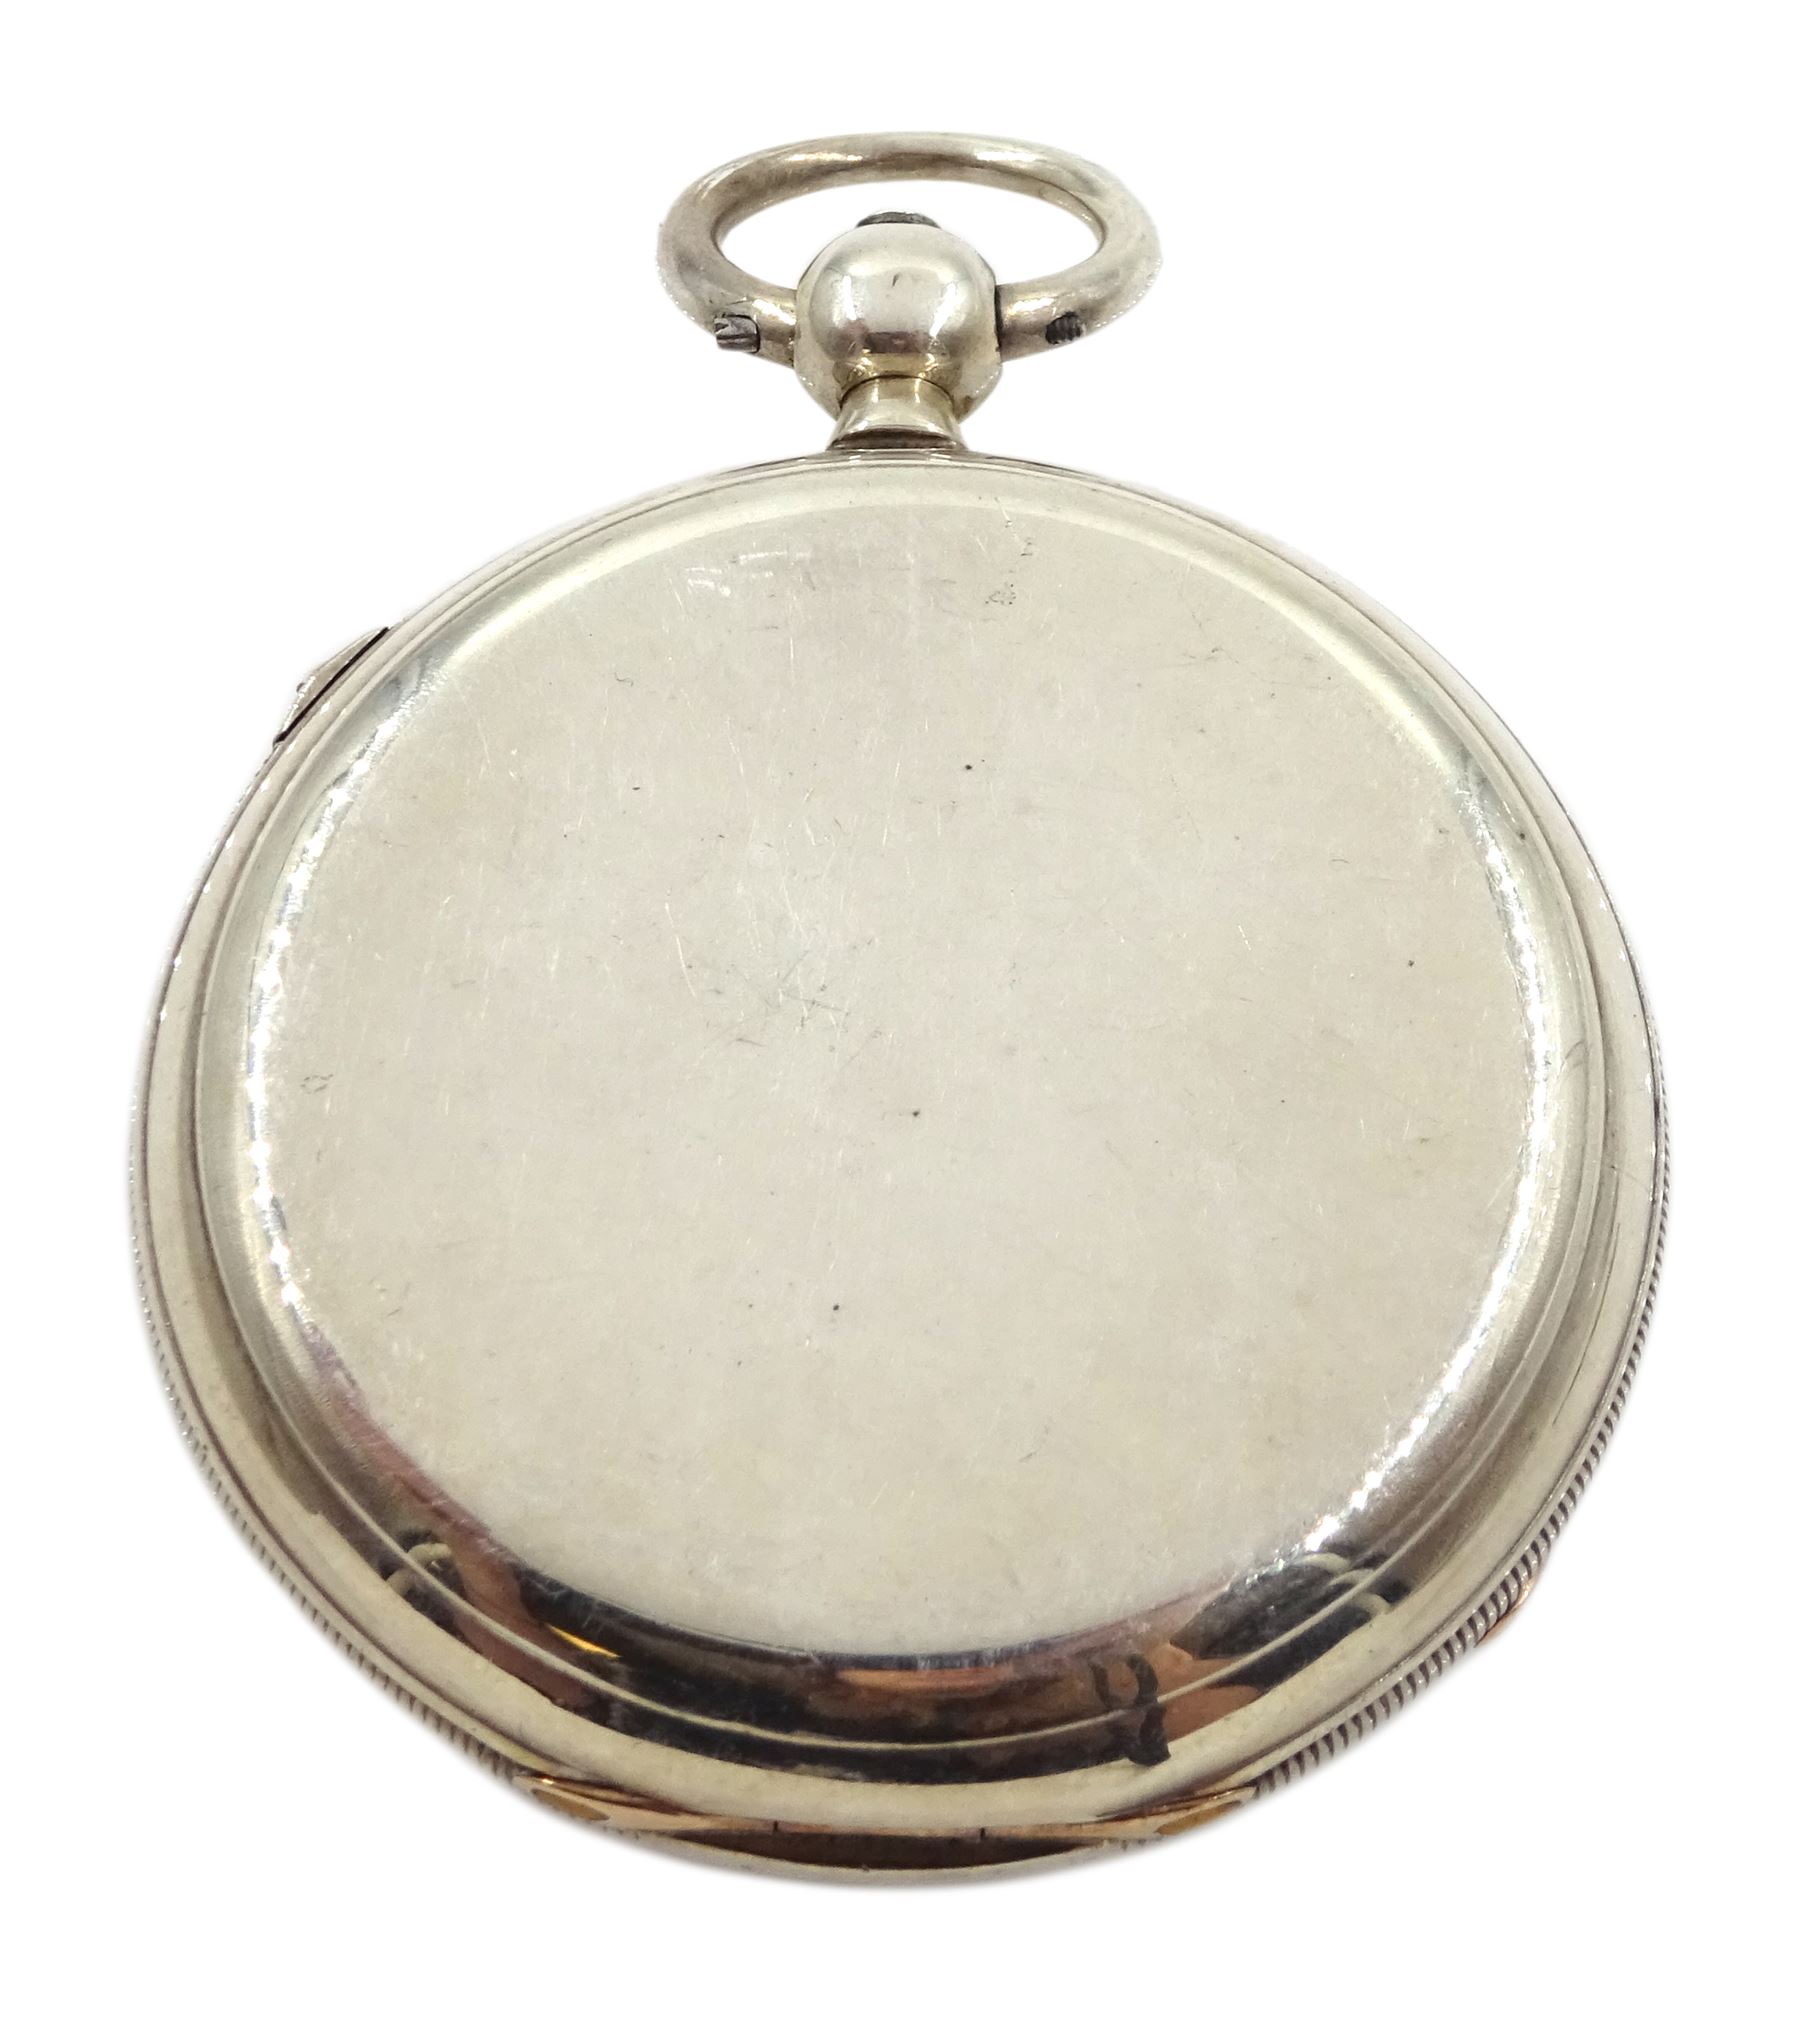 Victorian silver centre seconds key wound chronograph pocket watch by Masters & Co - Image 2 of 4